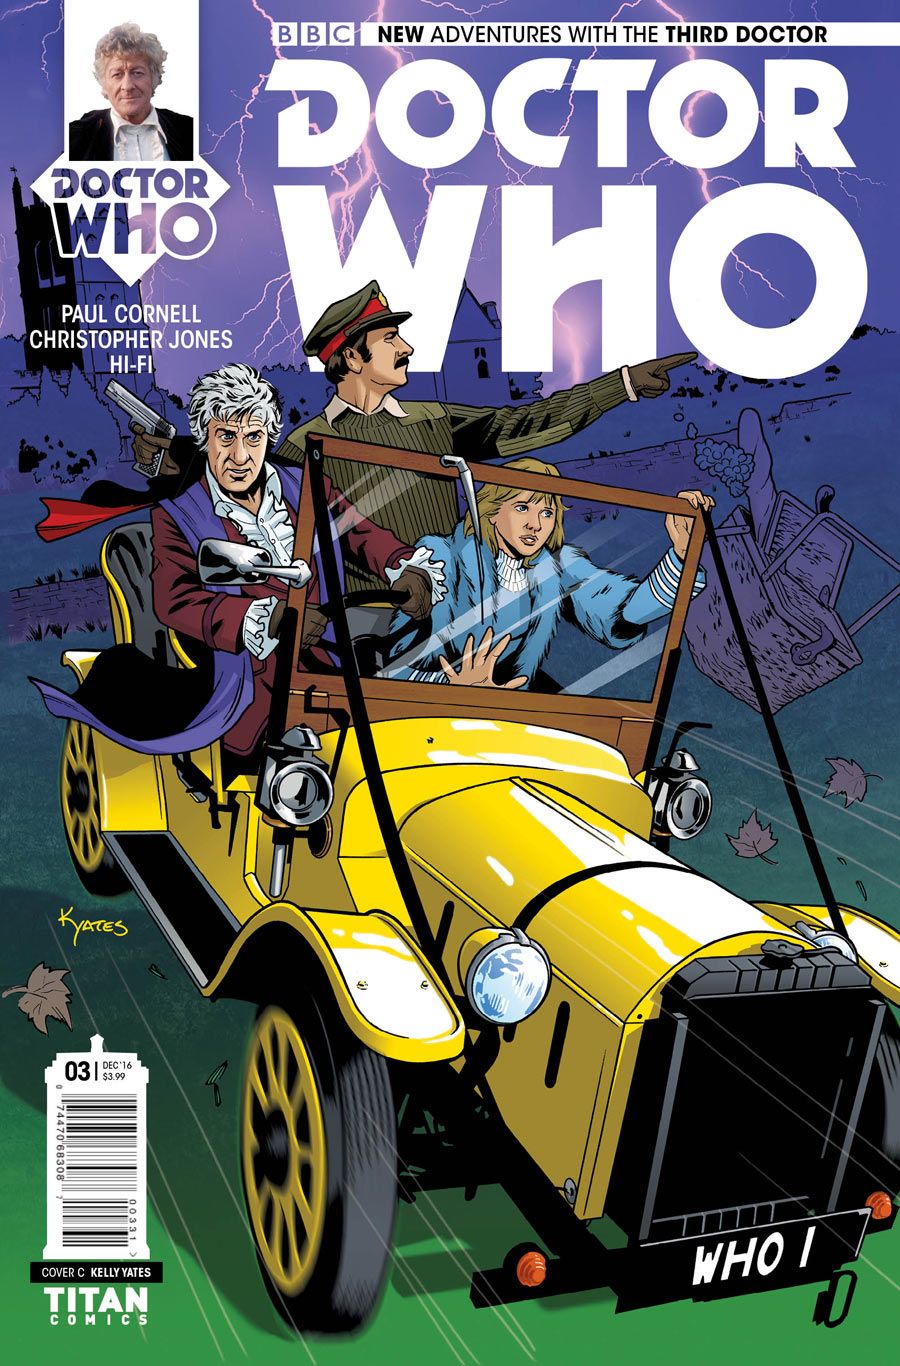 doctor_who_3d_03_cover_c_kelly_yates